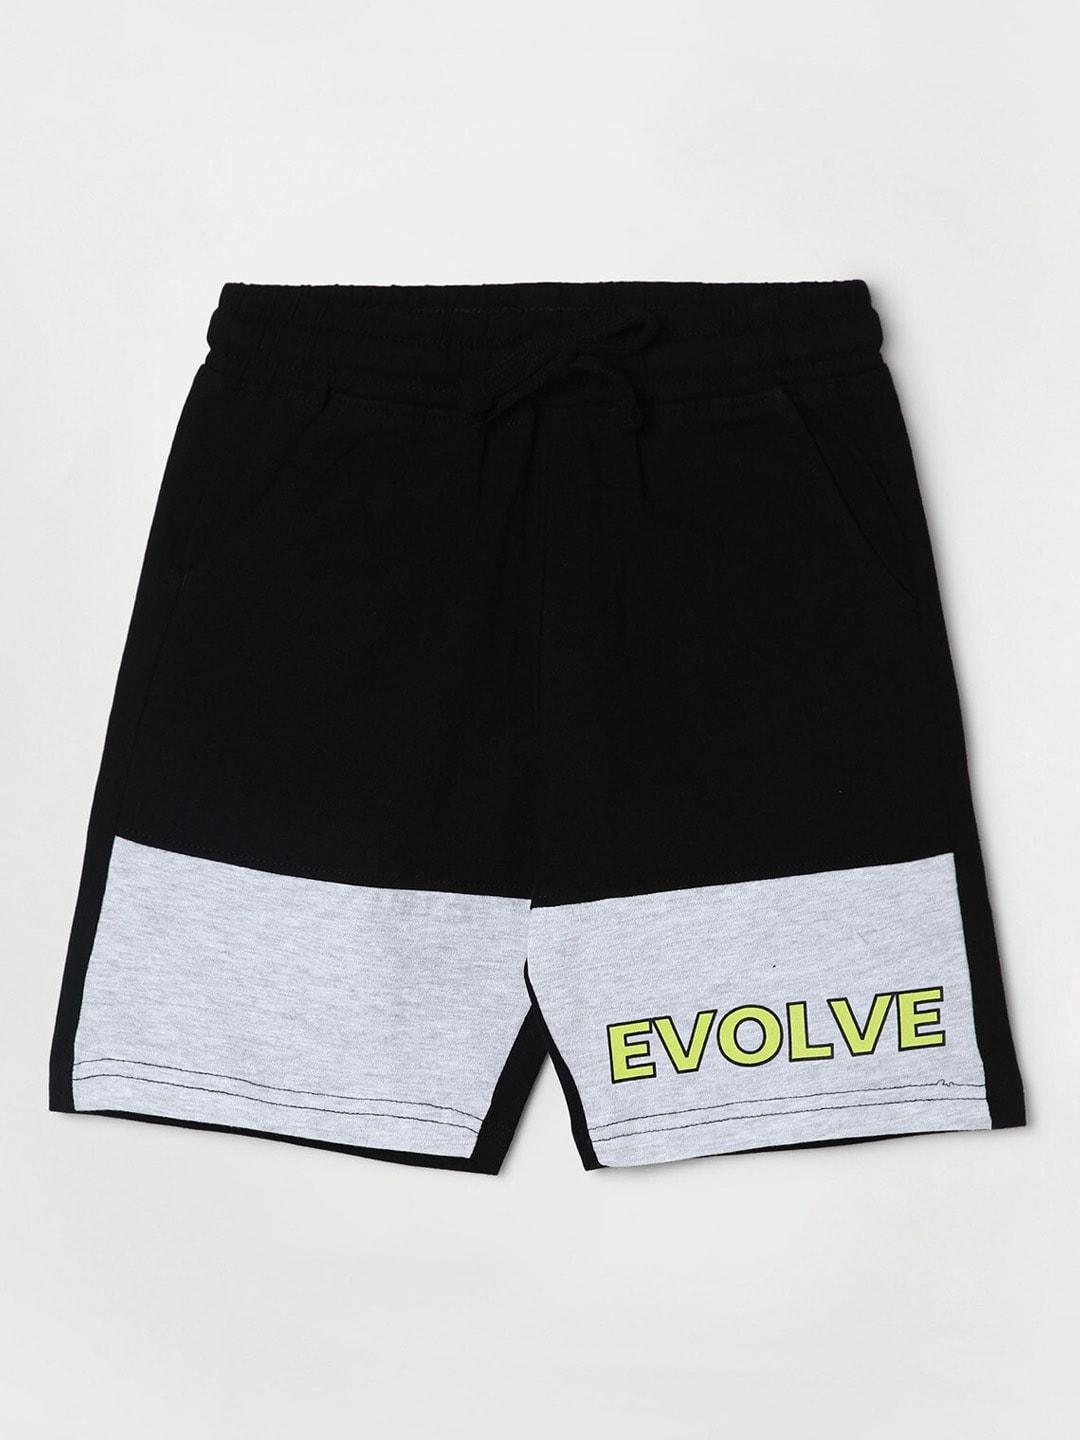 Fame Forever by Lifestyle Boys Colourblocked Cotton Shorts